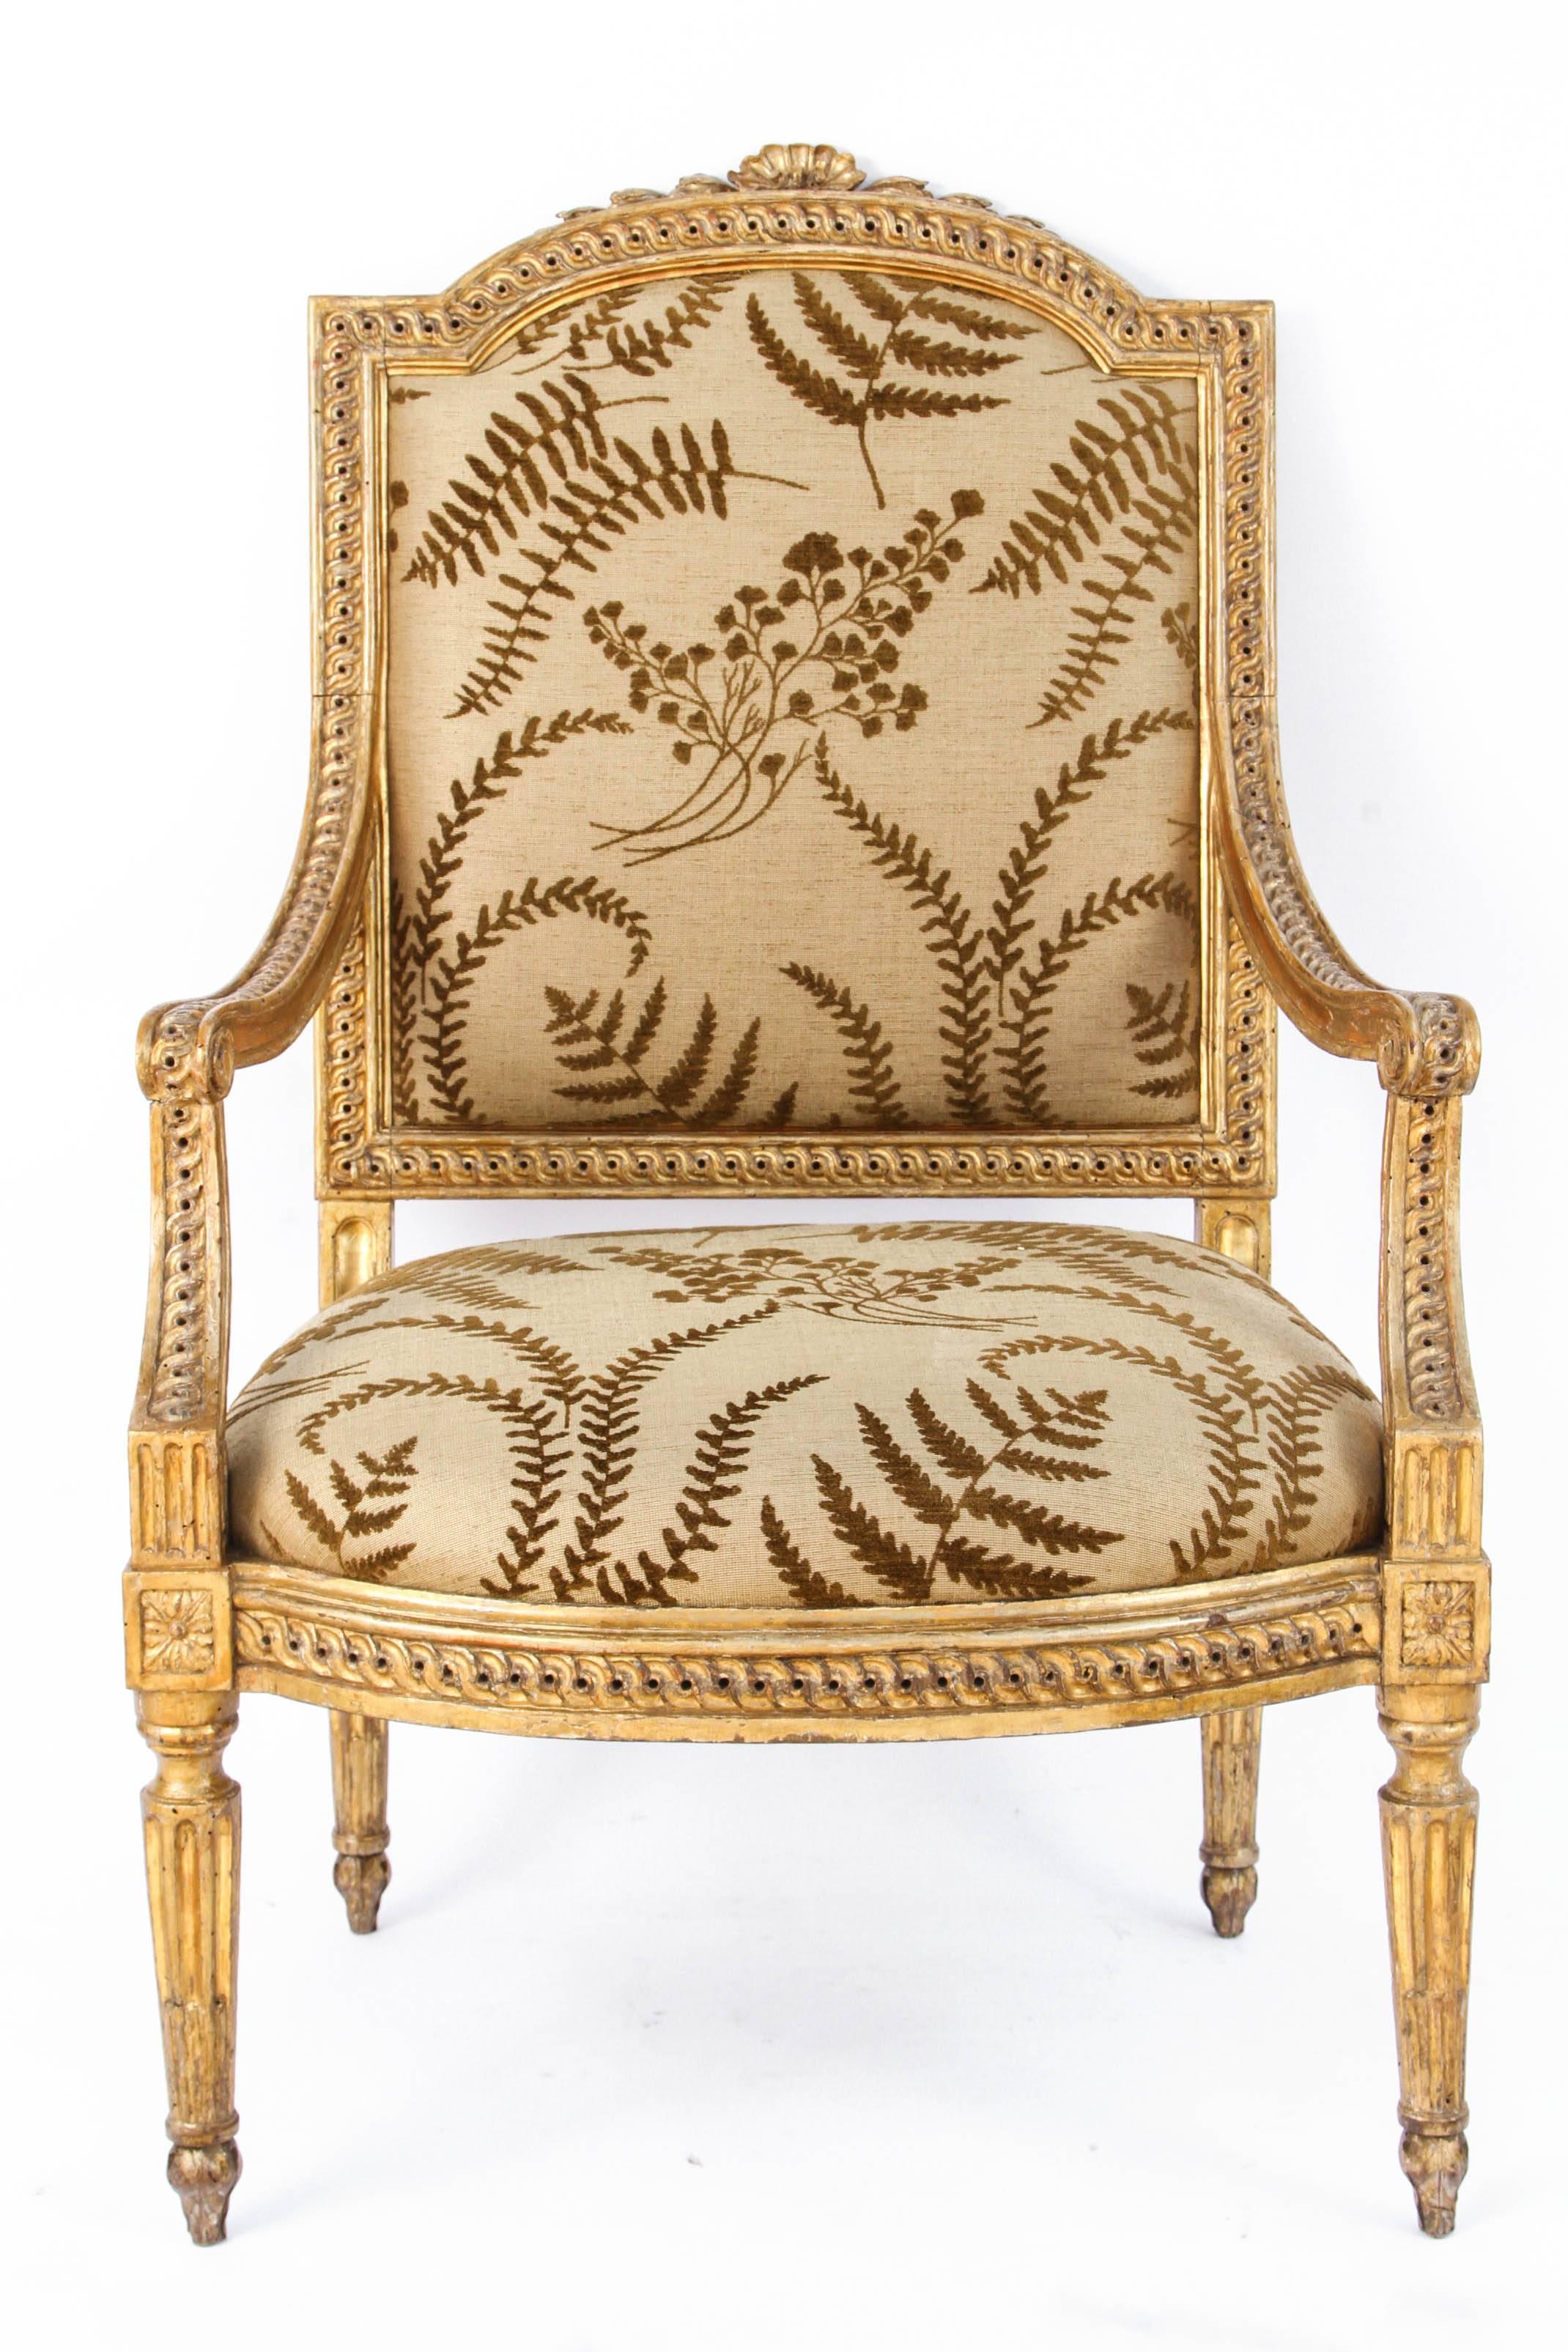 Pair of very fine 18th century Italian carved giltwood armchairs with shell motif. The chairs are upholstered in a botanical themed woven linen fabric. The price listed is for one pair but there is another pair available for purchase.